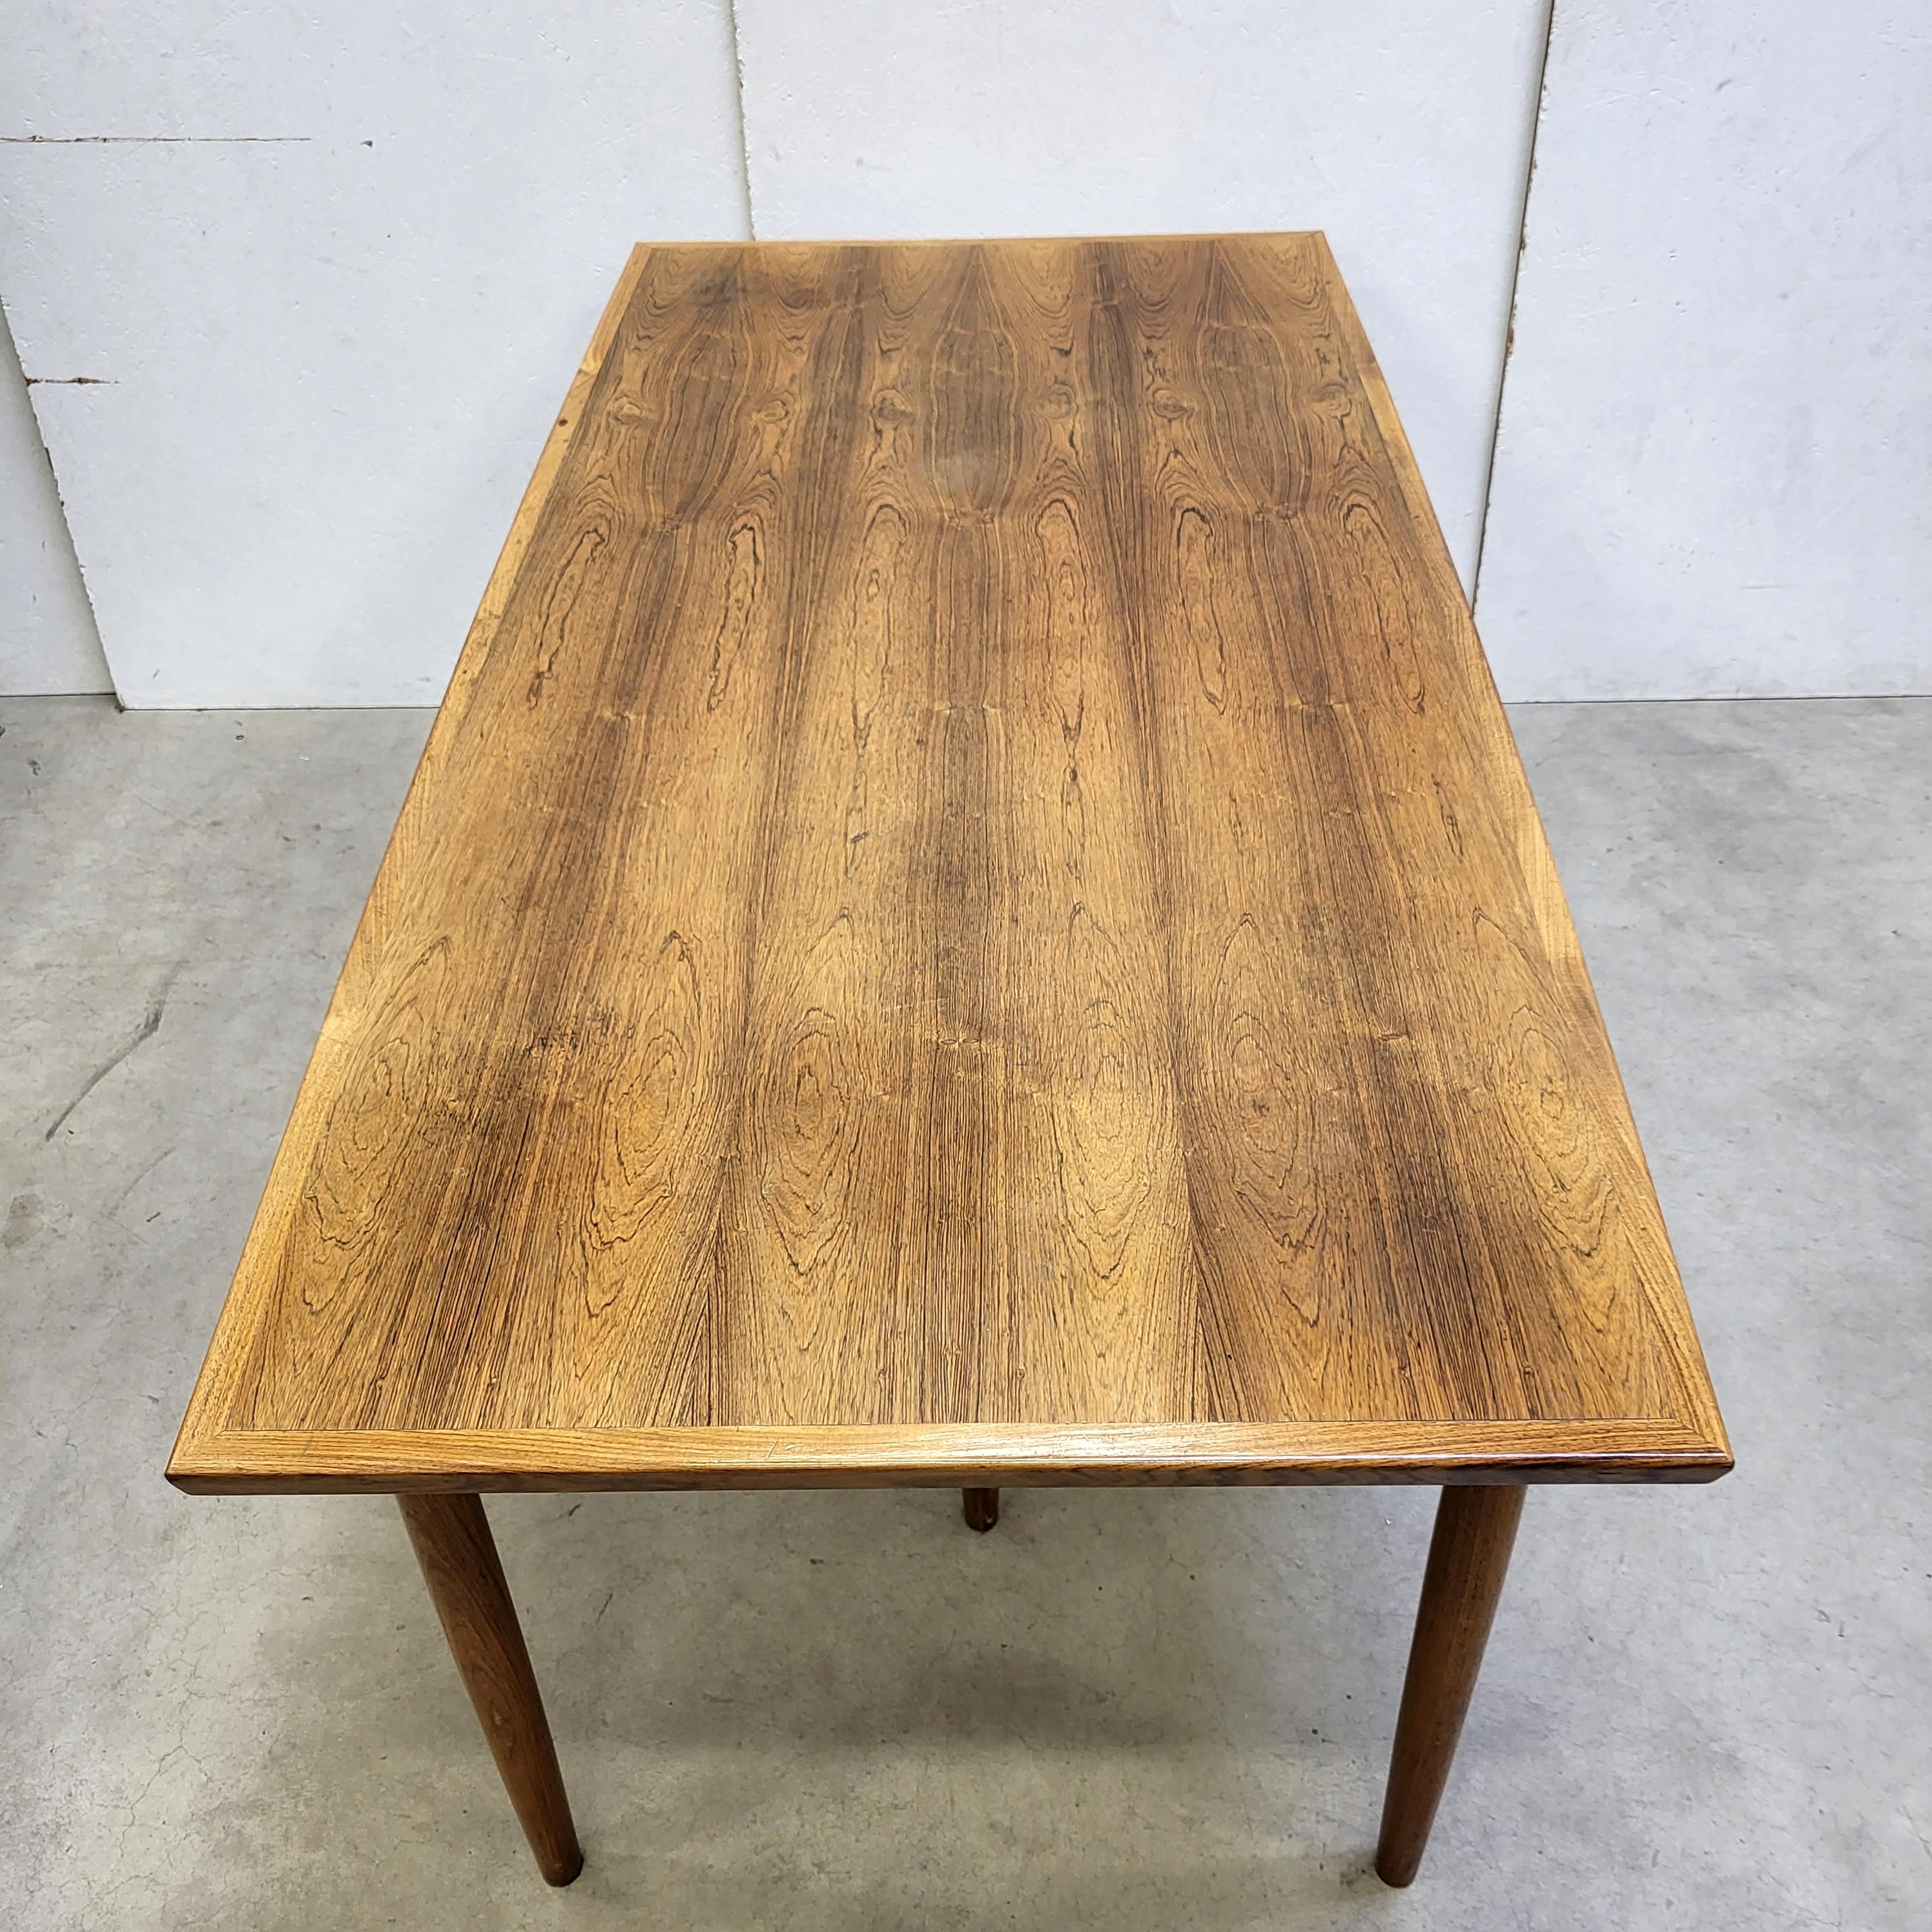 Fine and rare dining table Model 201 by Arne Vodder for Sibast Mobelfabrik.

The table was made and designed in Denmark in the 1960s.
Very nice example with a wonderful veneer. 

This edition has a wonderful top without the cuts in the middle